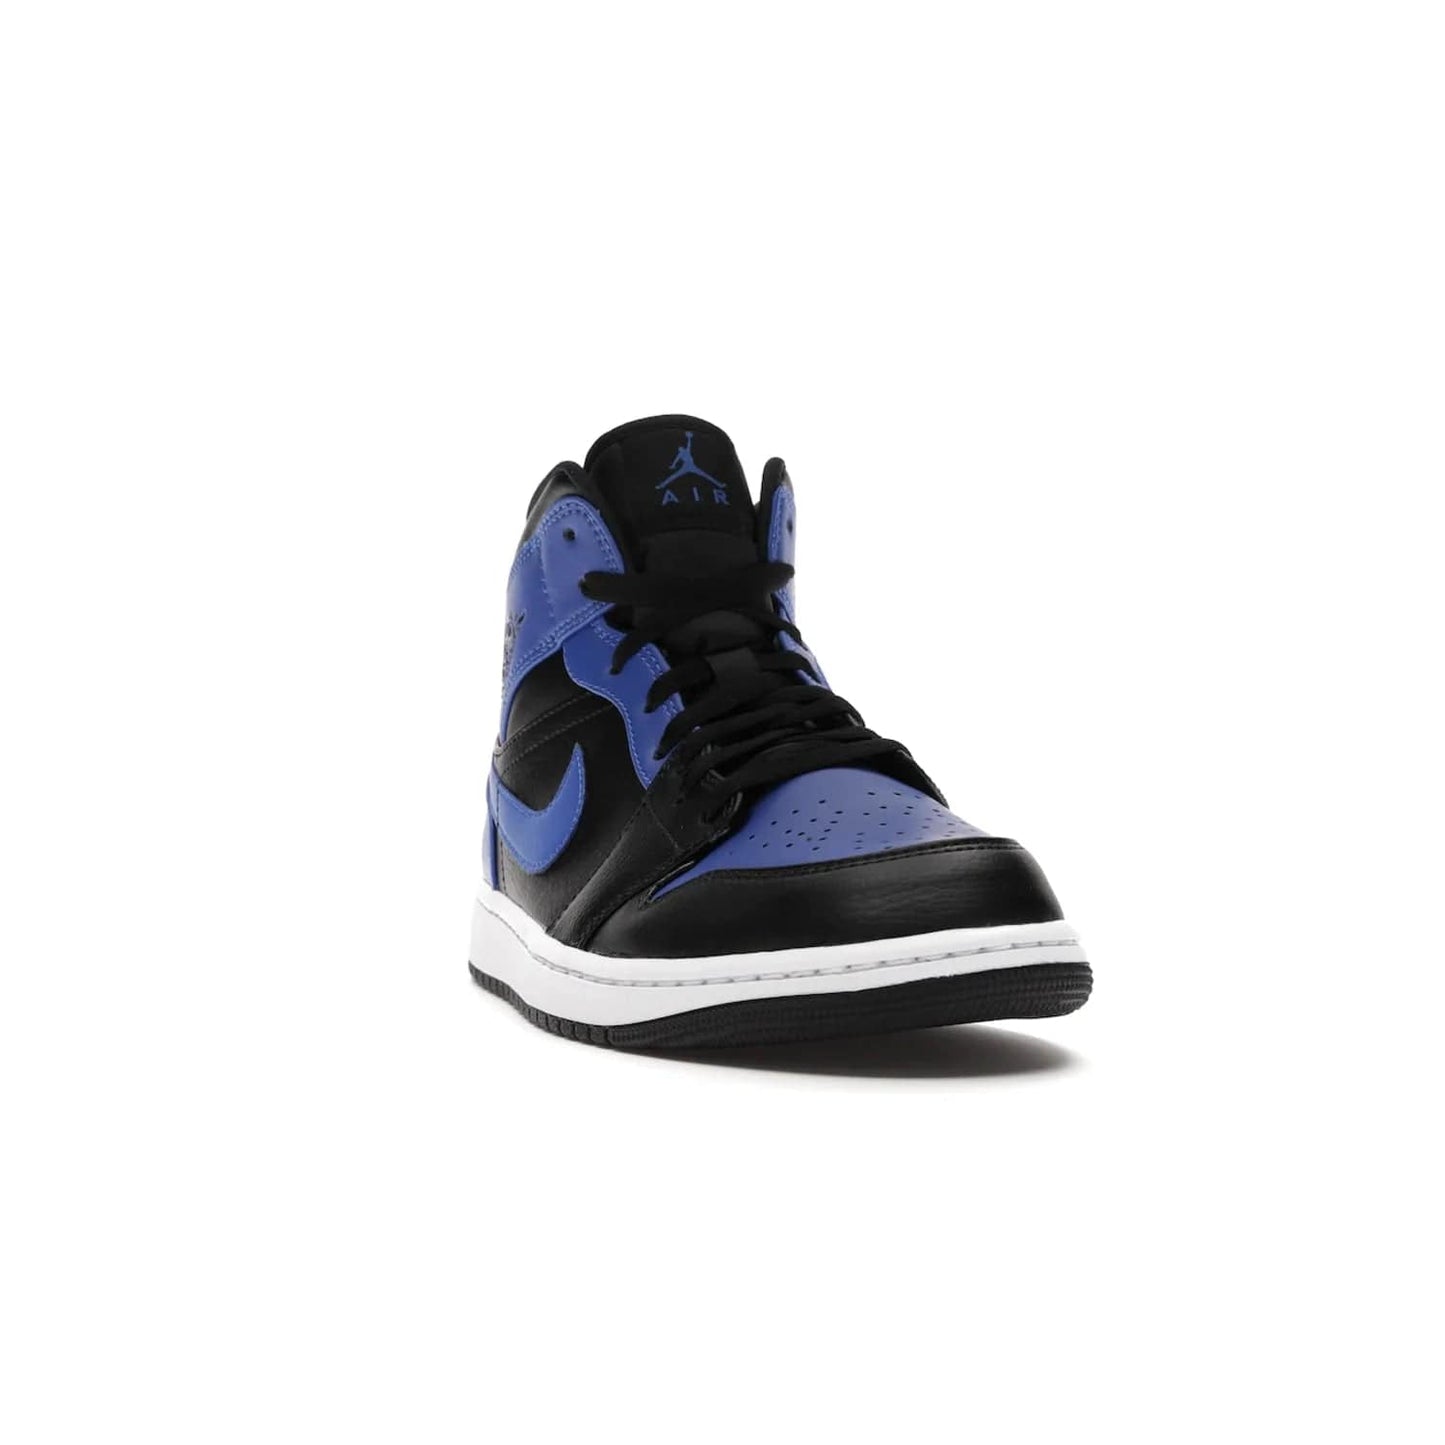 Jordan 1 Mid Hyper Royal Tumbled Leather - Image 8 - Only at www.BallersClubKickz.com - Iconic colorway of the Air Jordan 1 Mid Black Royal Tumbled Leather. Features a black tumbled leather upper, royal blue leather overlays, white midsole & black rubber outsole. Released December 2020. Adds premium style to any collection.